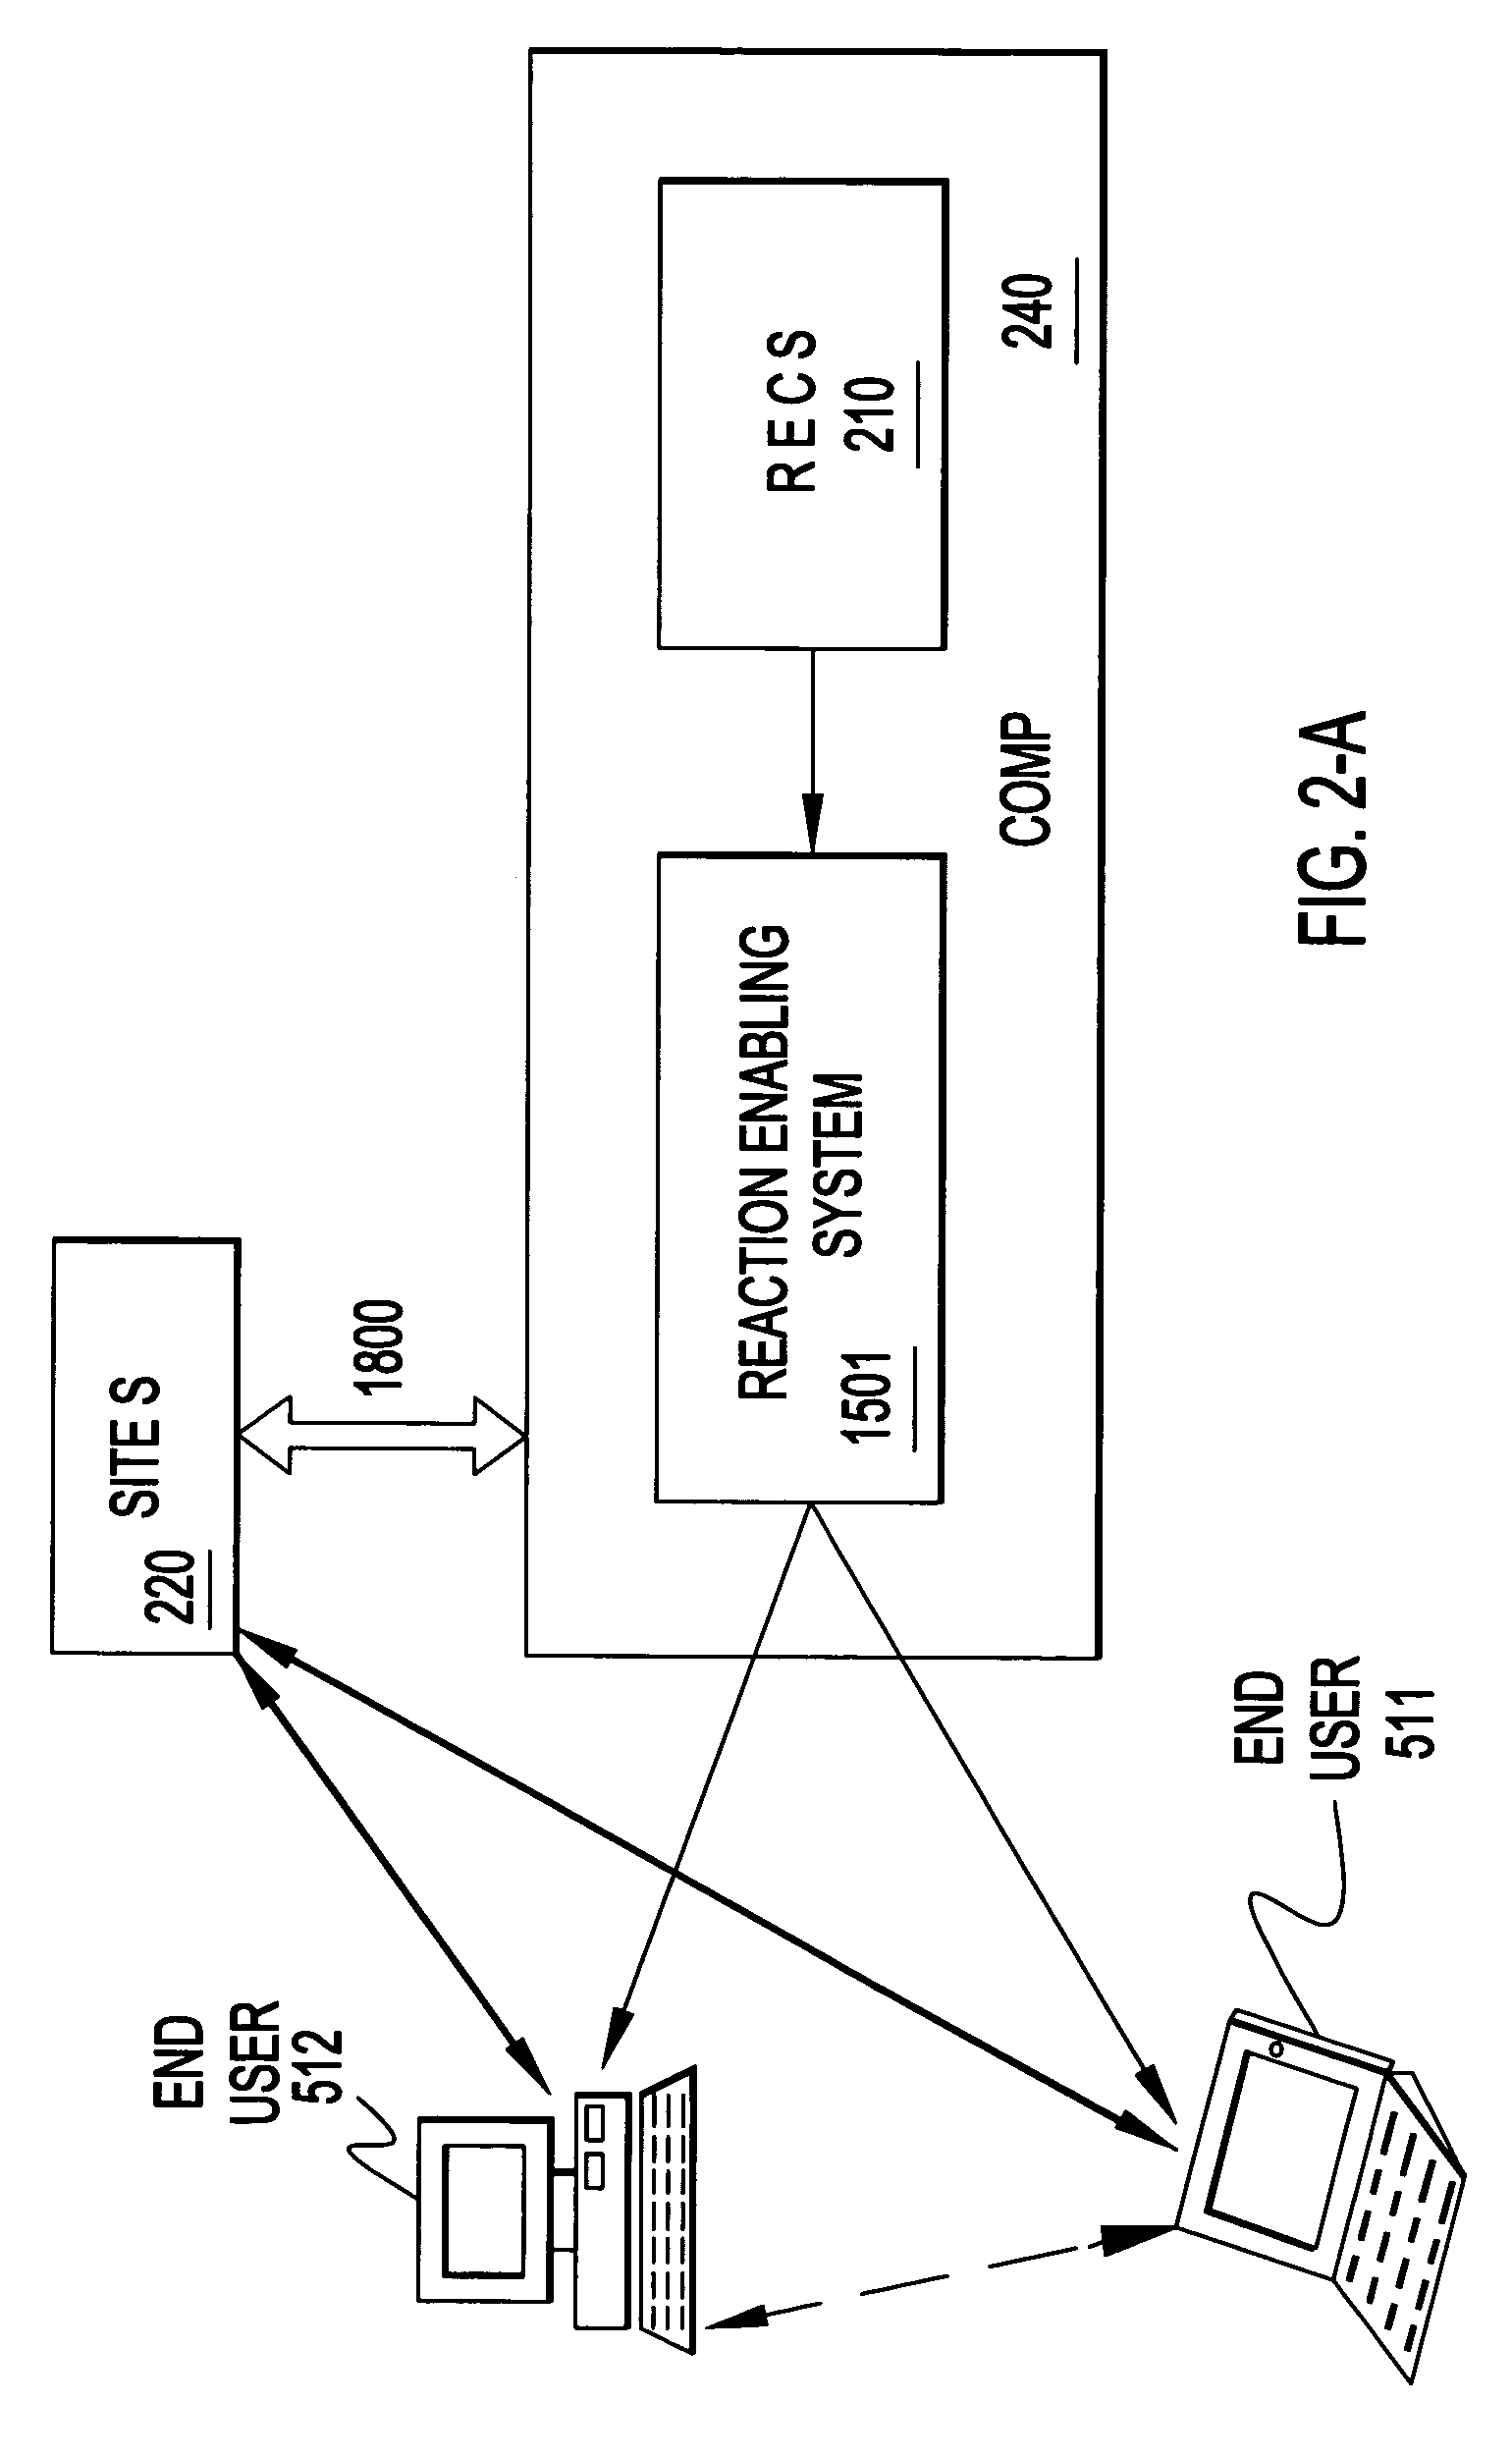 System, method, service method, and program product for managing entitlement with identity and privacy applications for electronic commerce